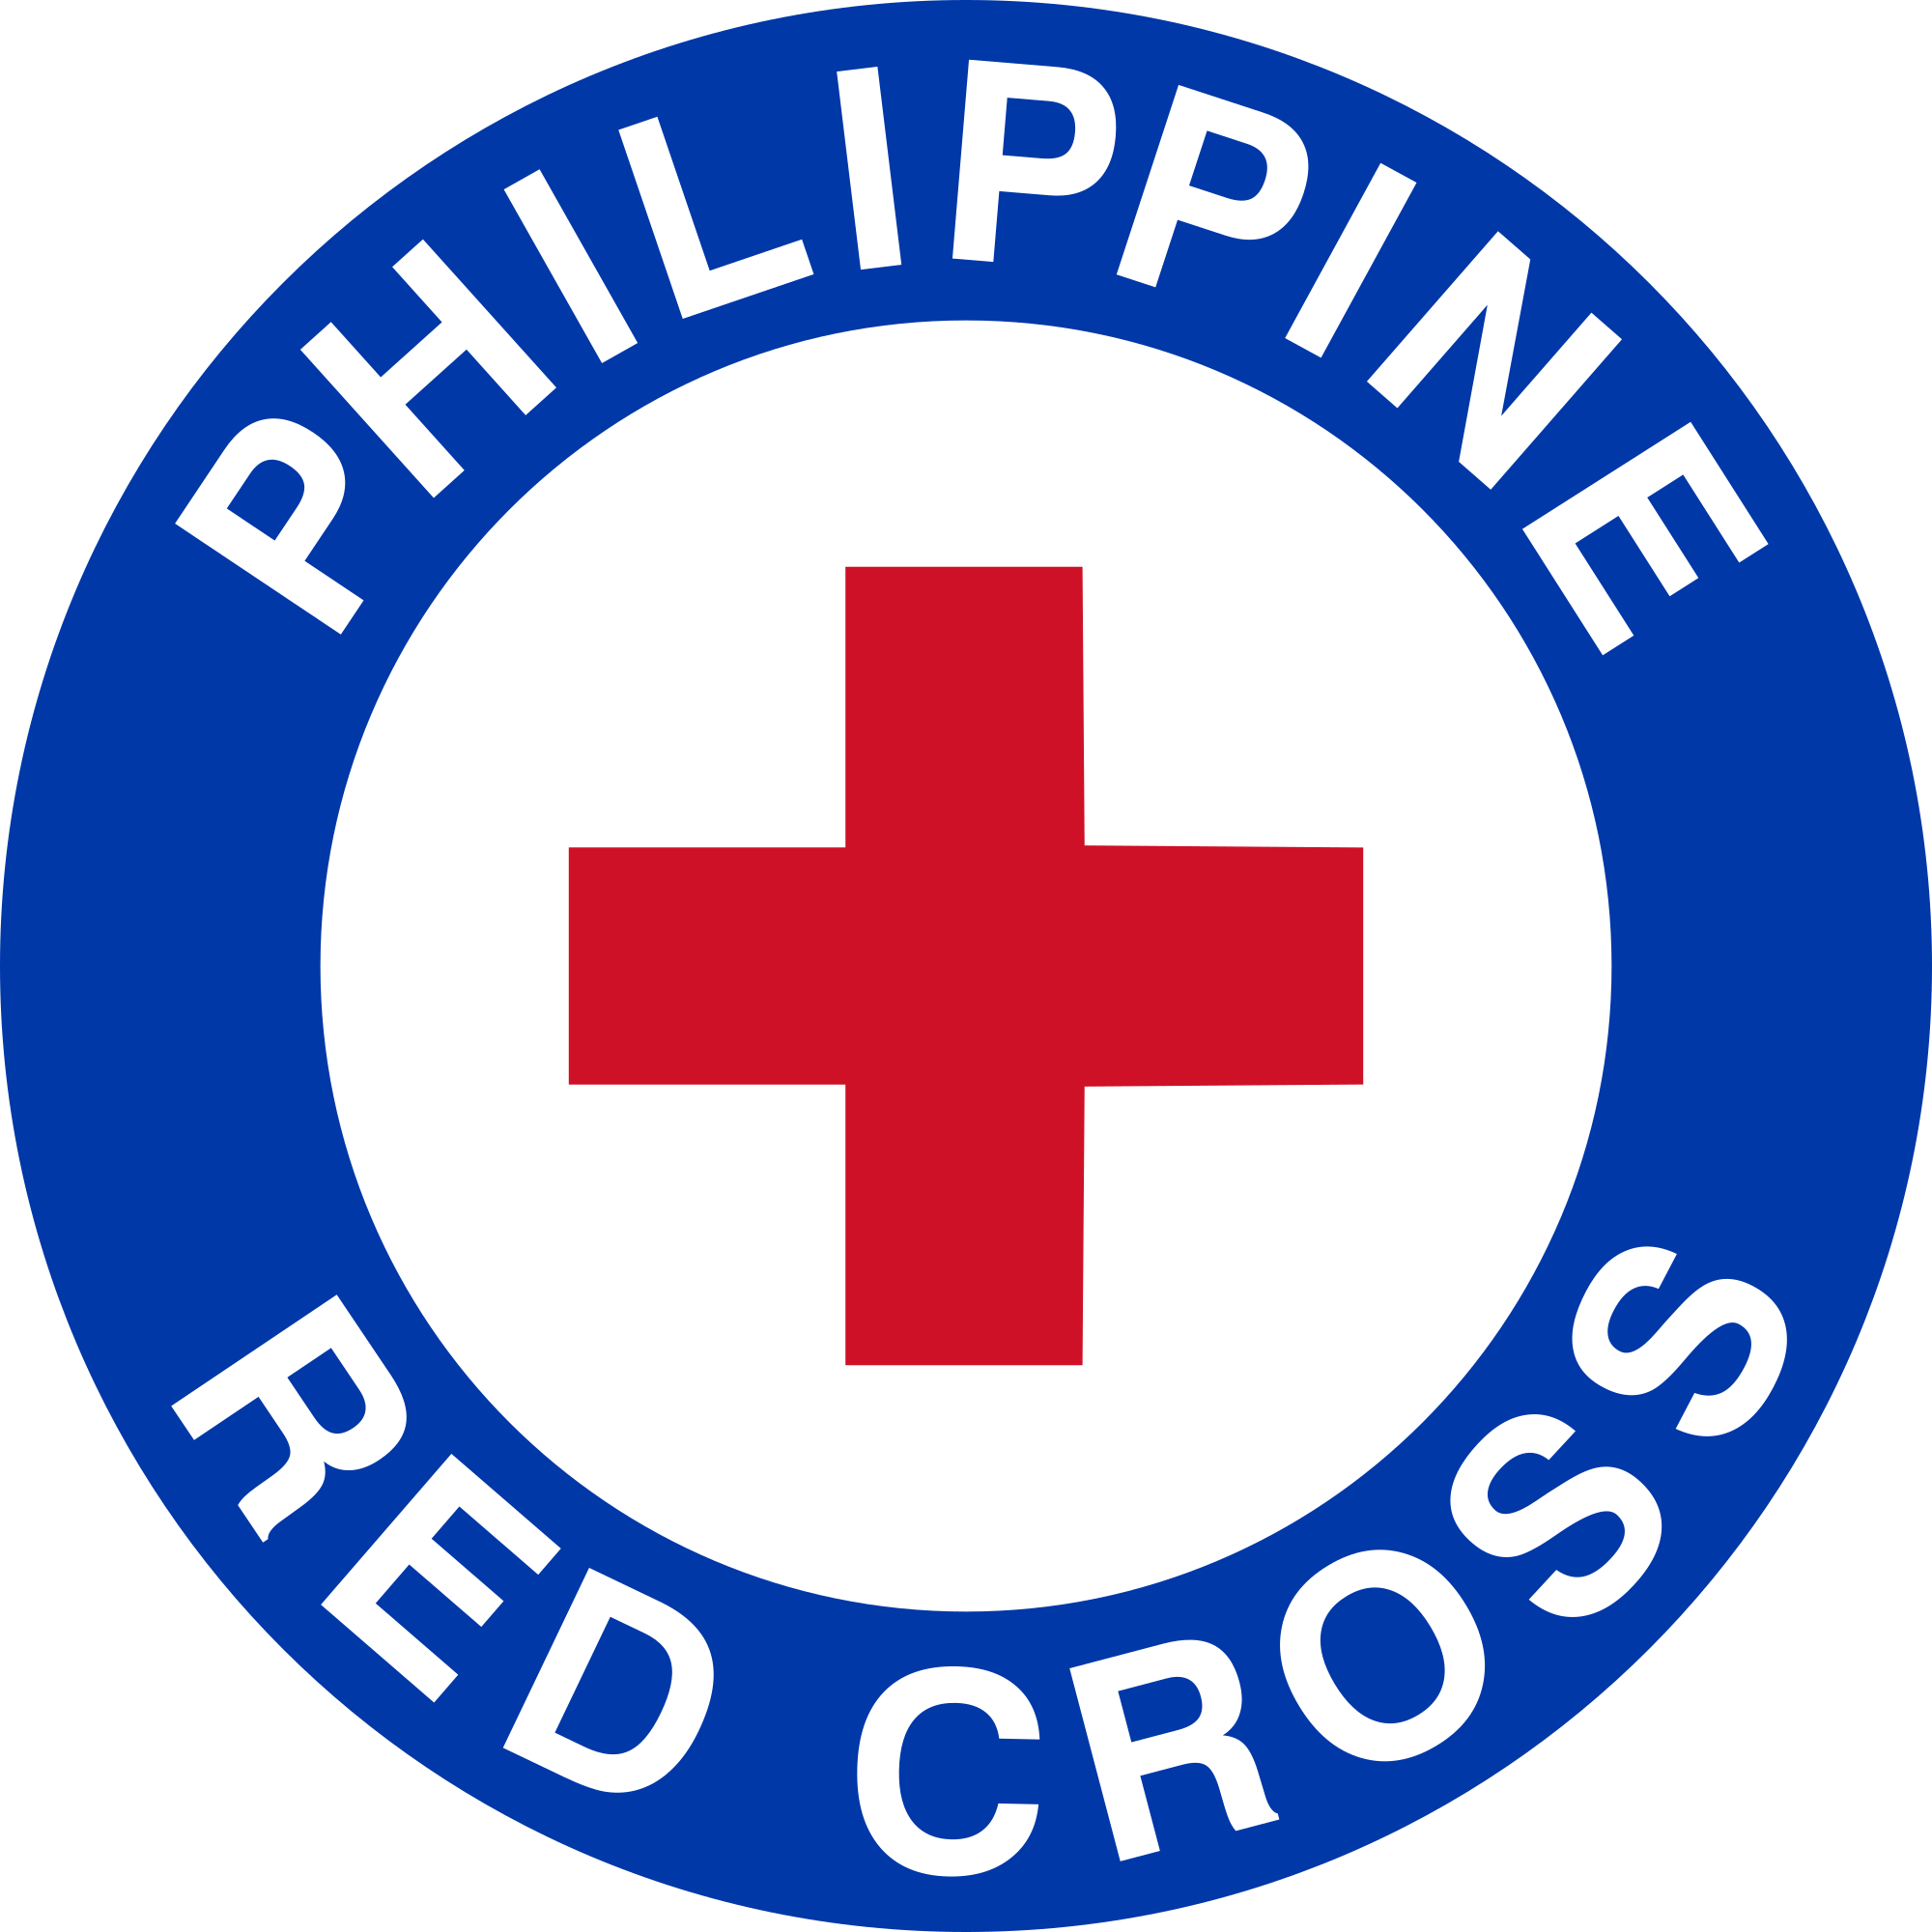 Philippine National Red Cross Logo - File:Logo Philippine Red Cross.svg - Wikimedia Commons